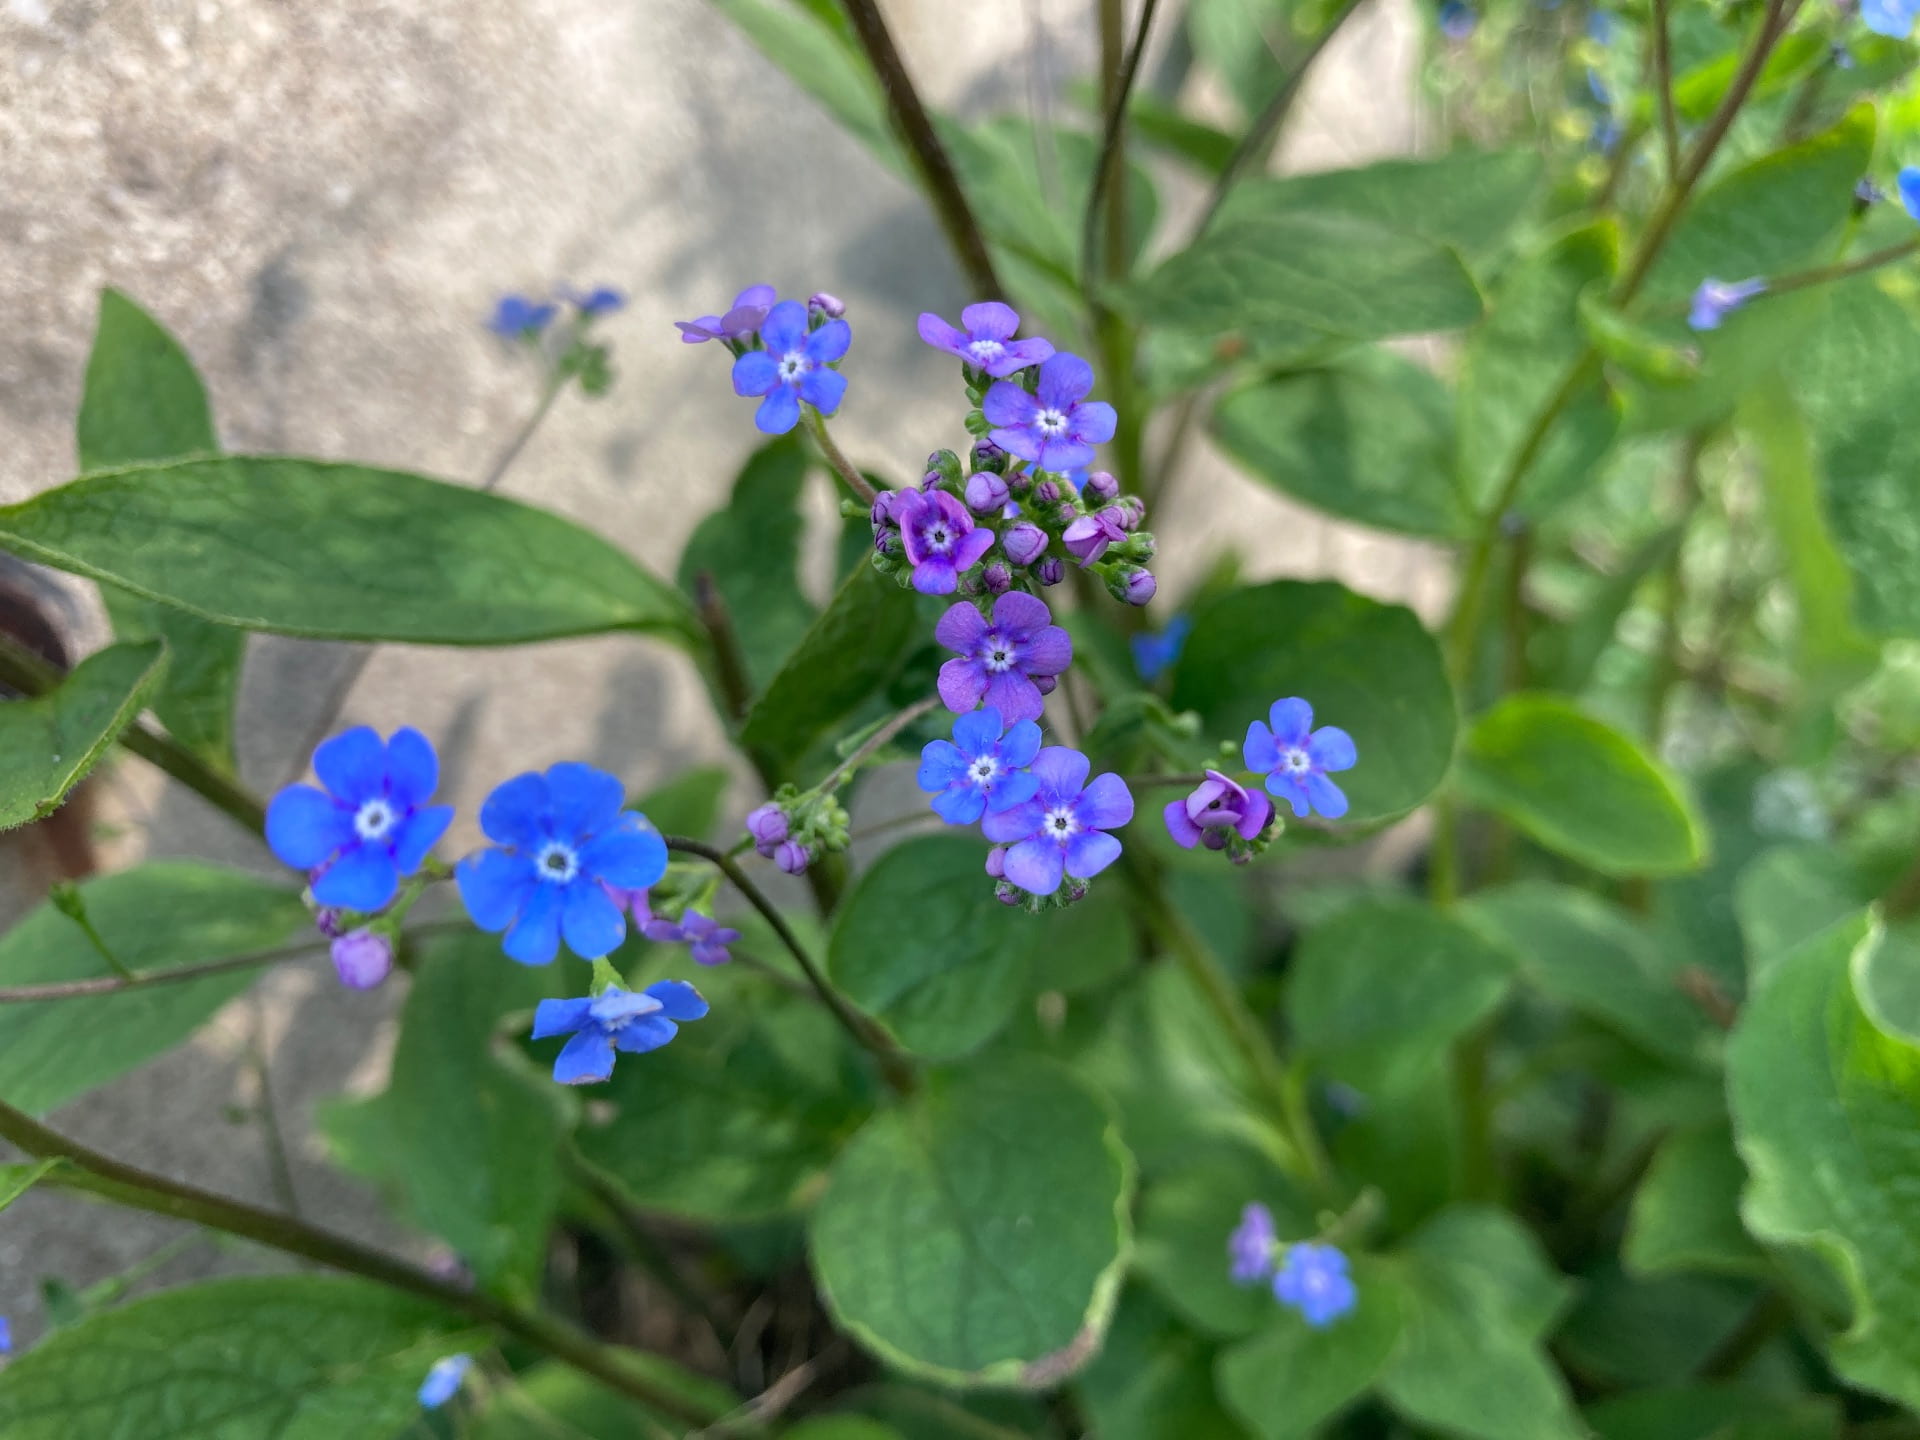 Brunnera macrophylla produces a profussion of small blue flowers throughout the spring.